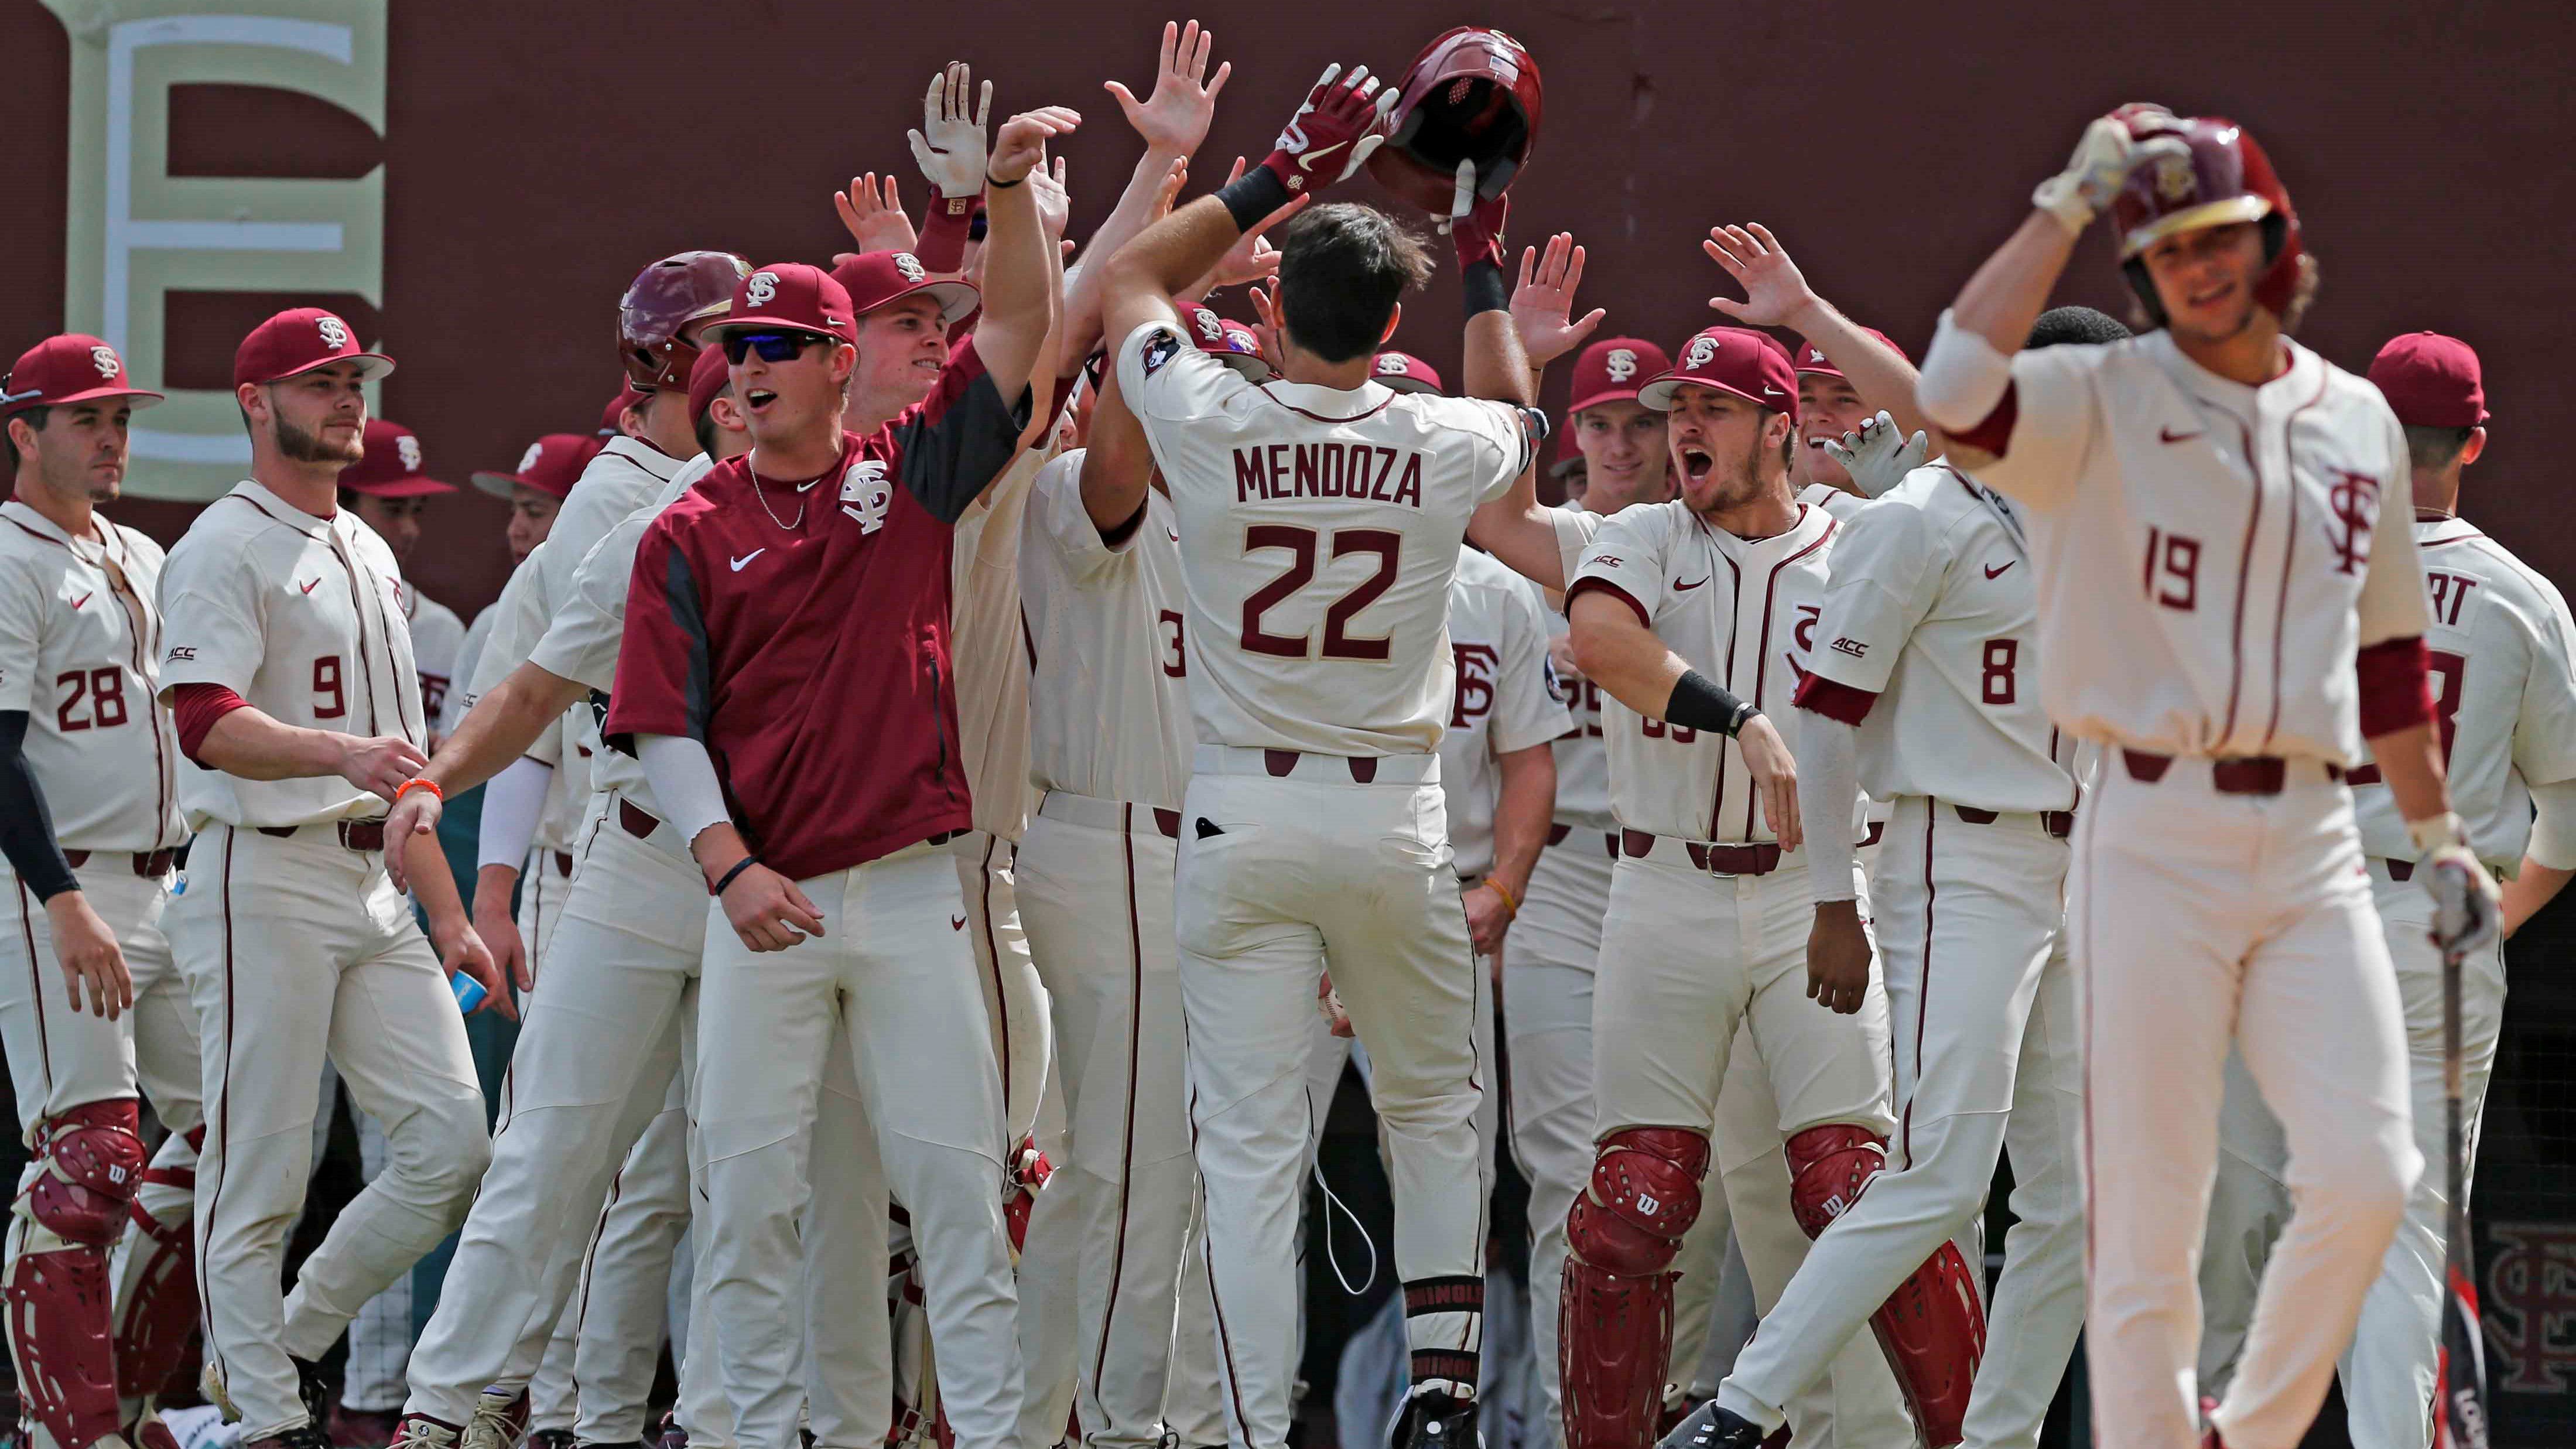 Florida State stuns LSU in 12th inning to reach College World Series